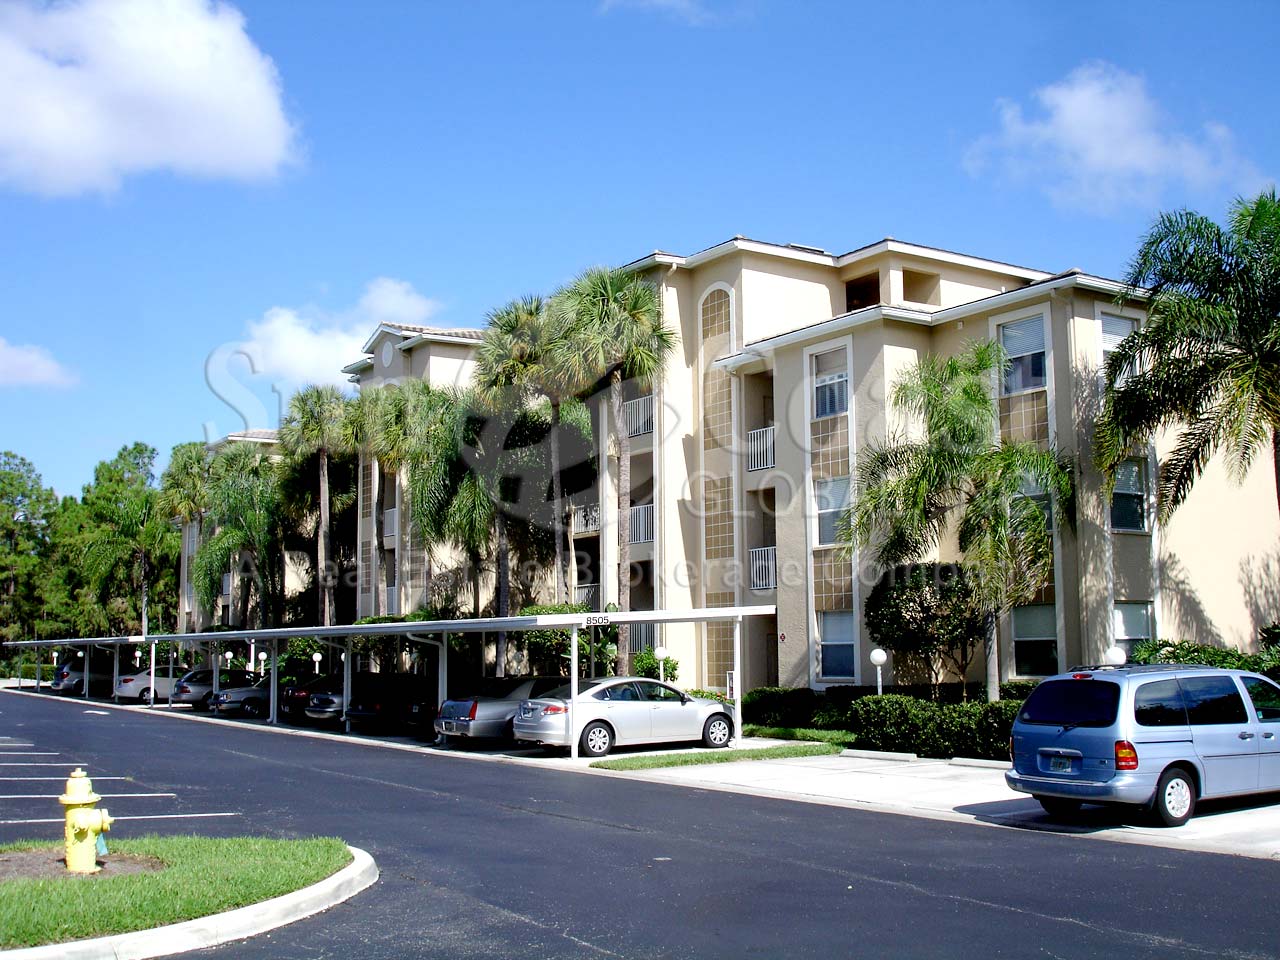 Prestwick is a 4-story condo complex with car ports.